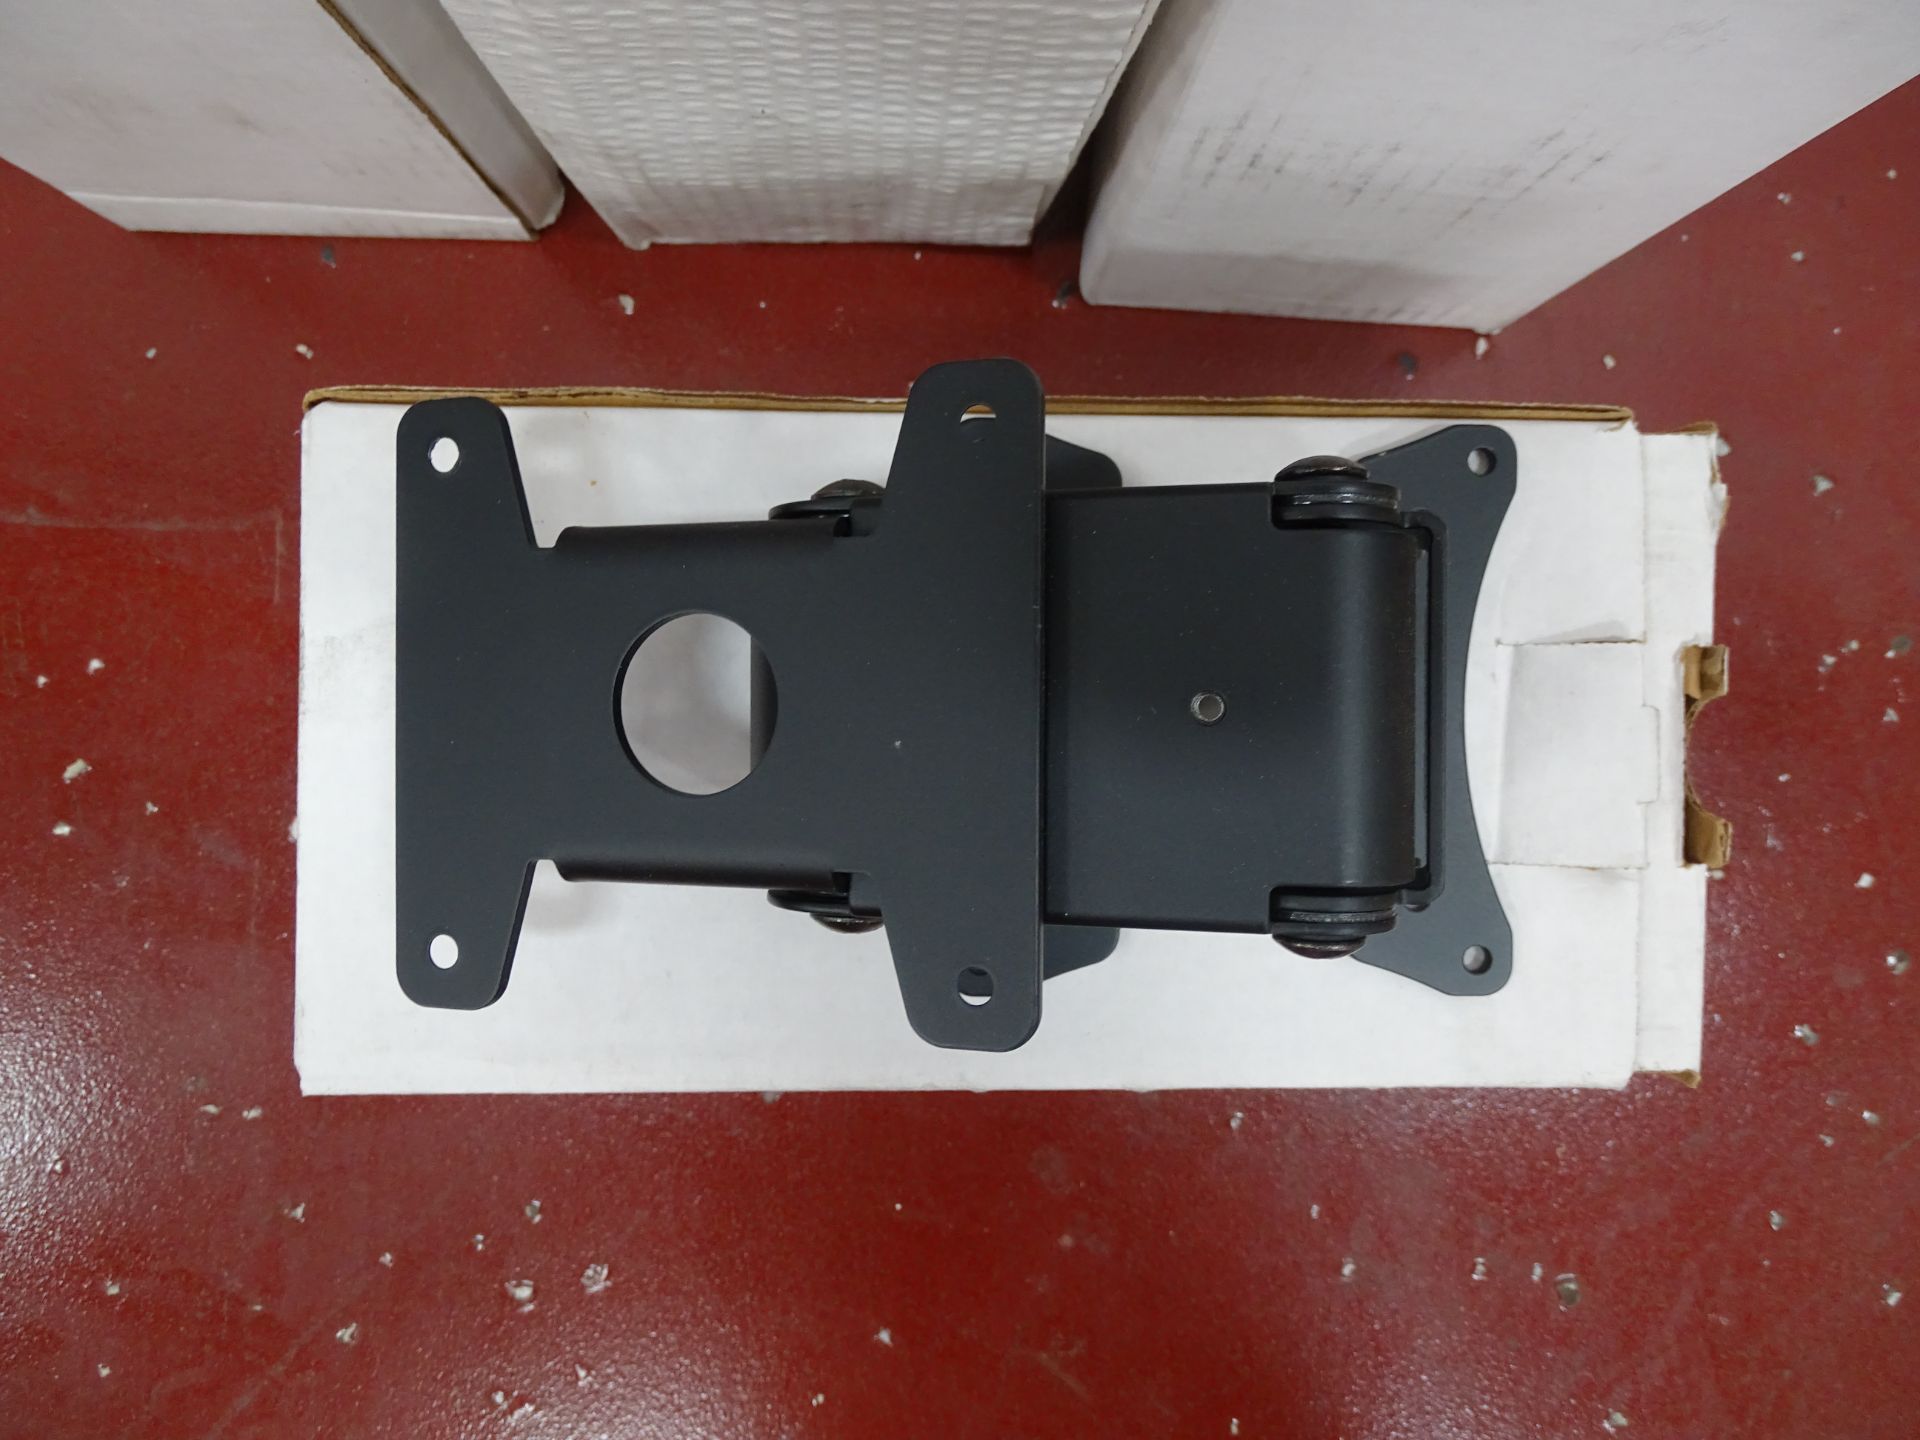 (8) Engineered Network Systems INC 367-2813-05-A Monitor Wall Mount Q16323 - Image 2 of 3